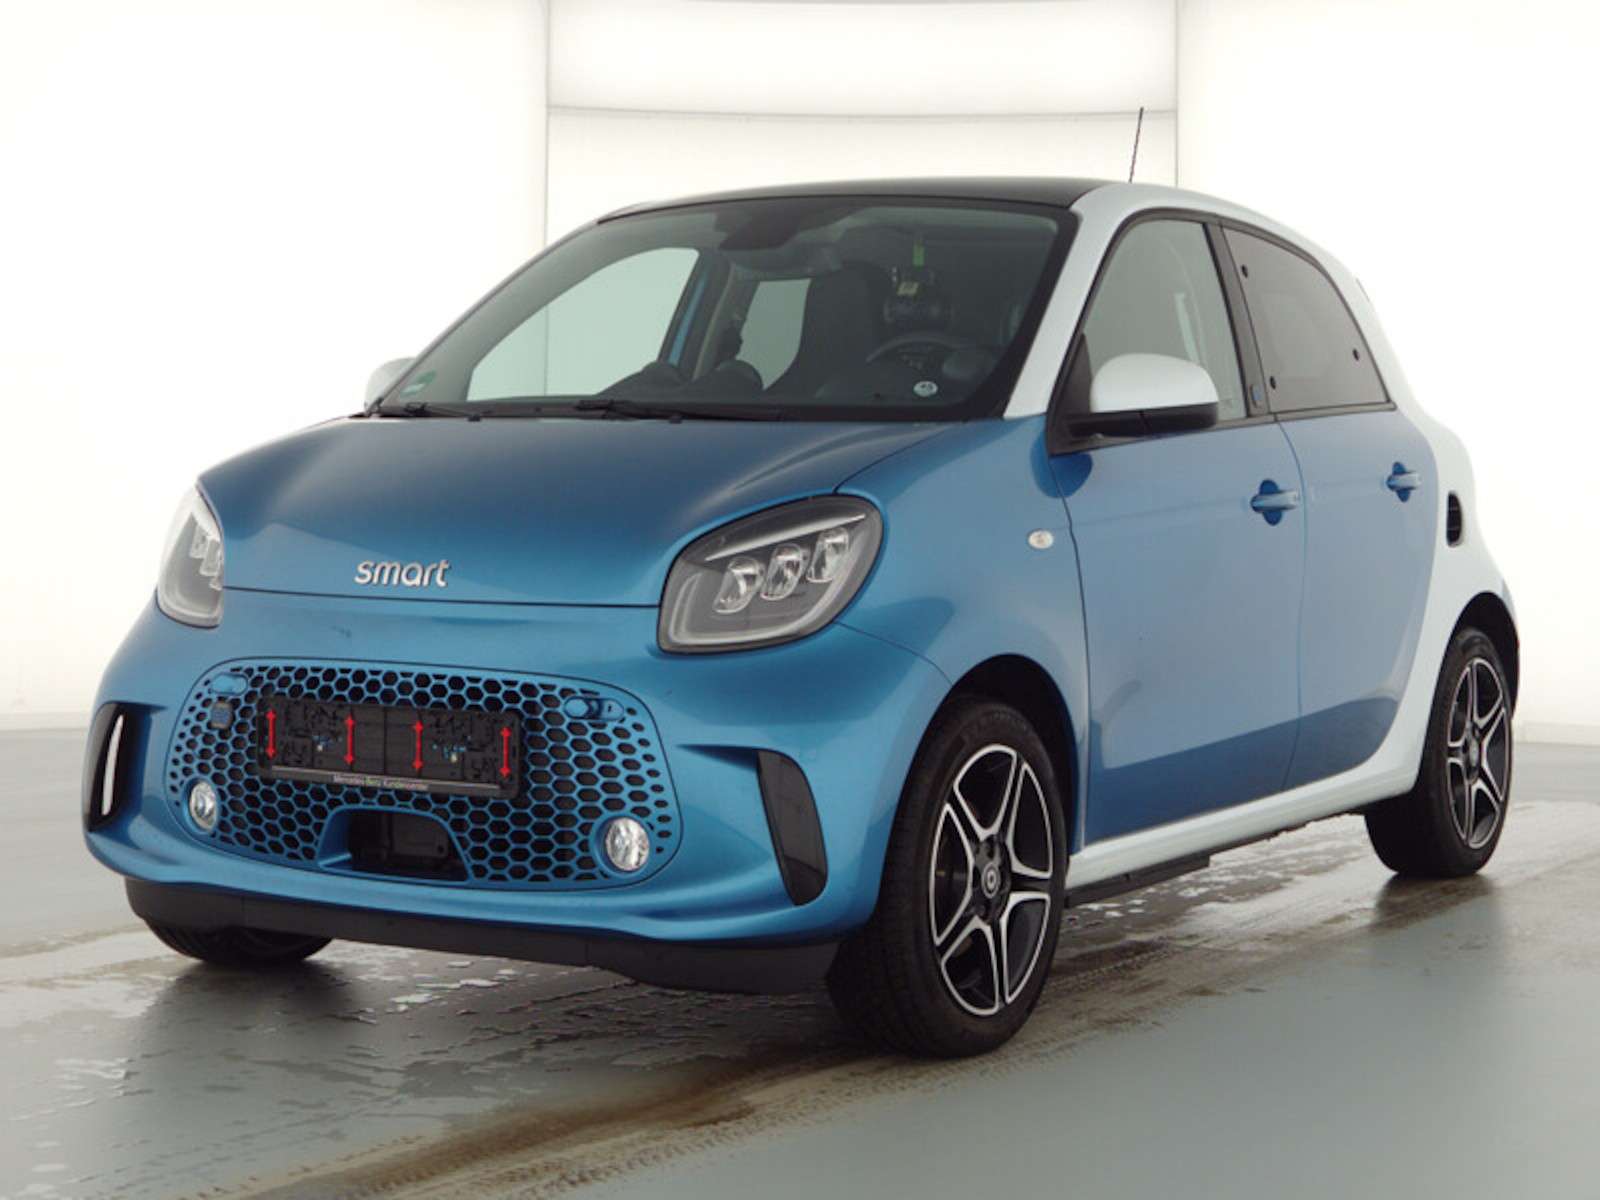 smart forFour Compact in Blue used in Ehningen for € 17,600.-